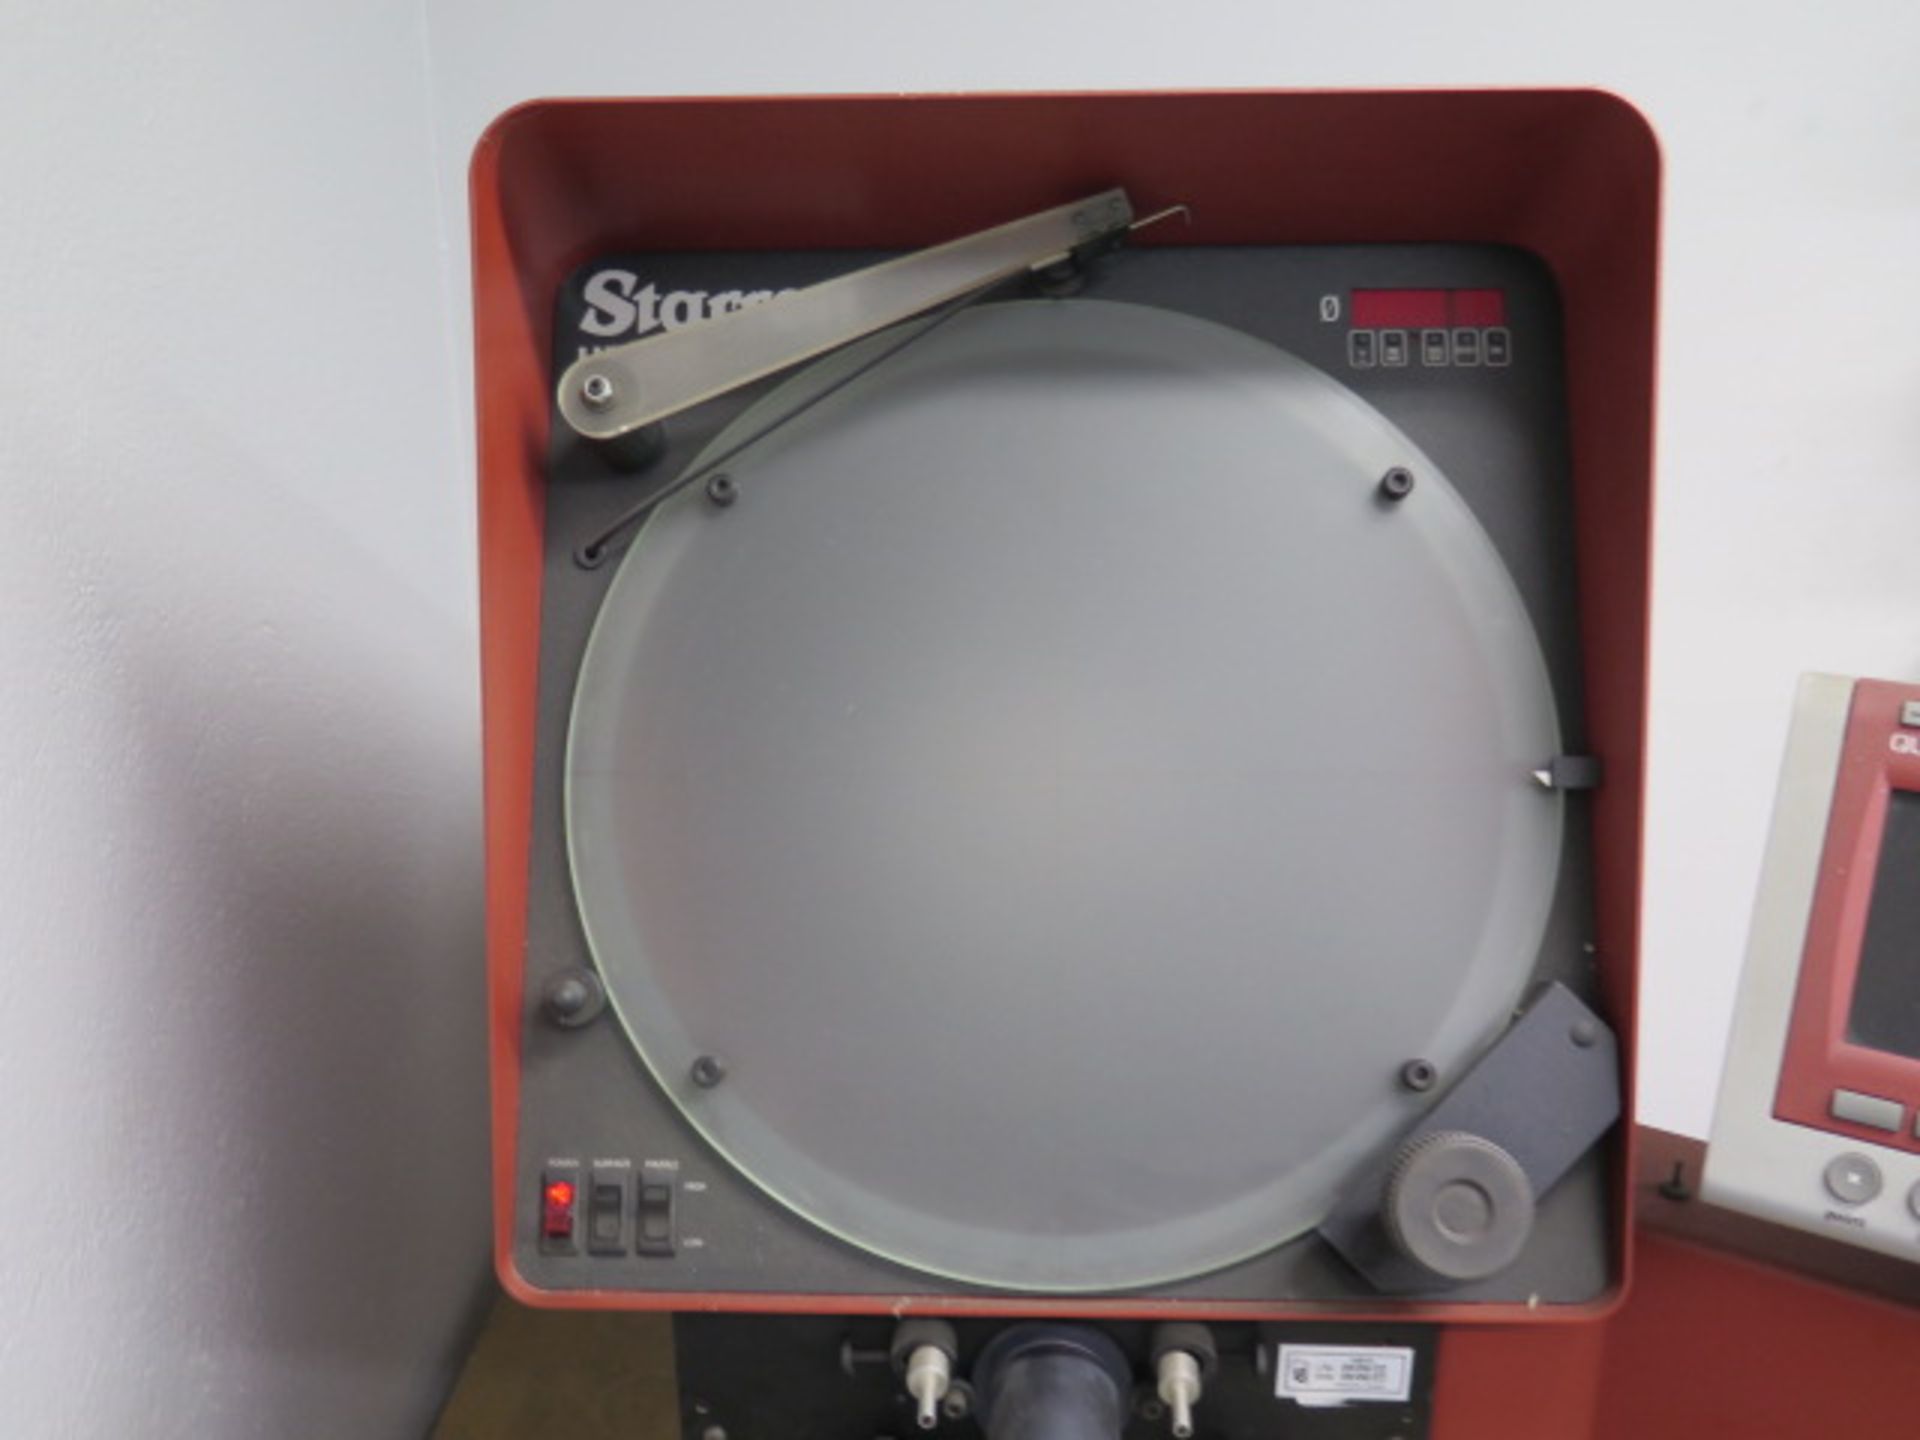 Starrett HE350 14” Optical Comparator s/n 40910 w/ Quadra-Chek 200 Programmable DRO, SOLD AS IS - Image 4 of 9